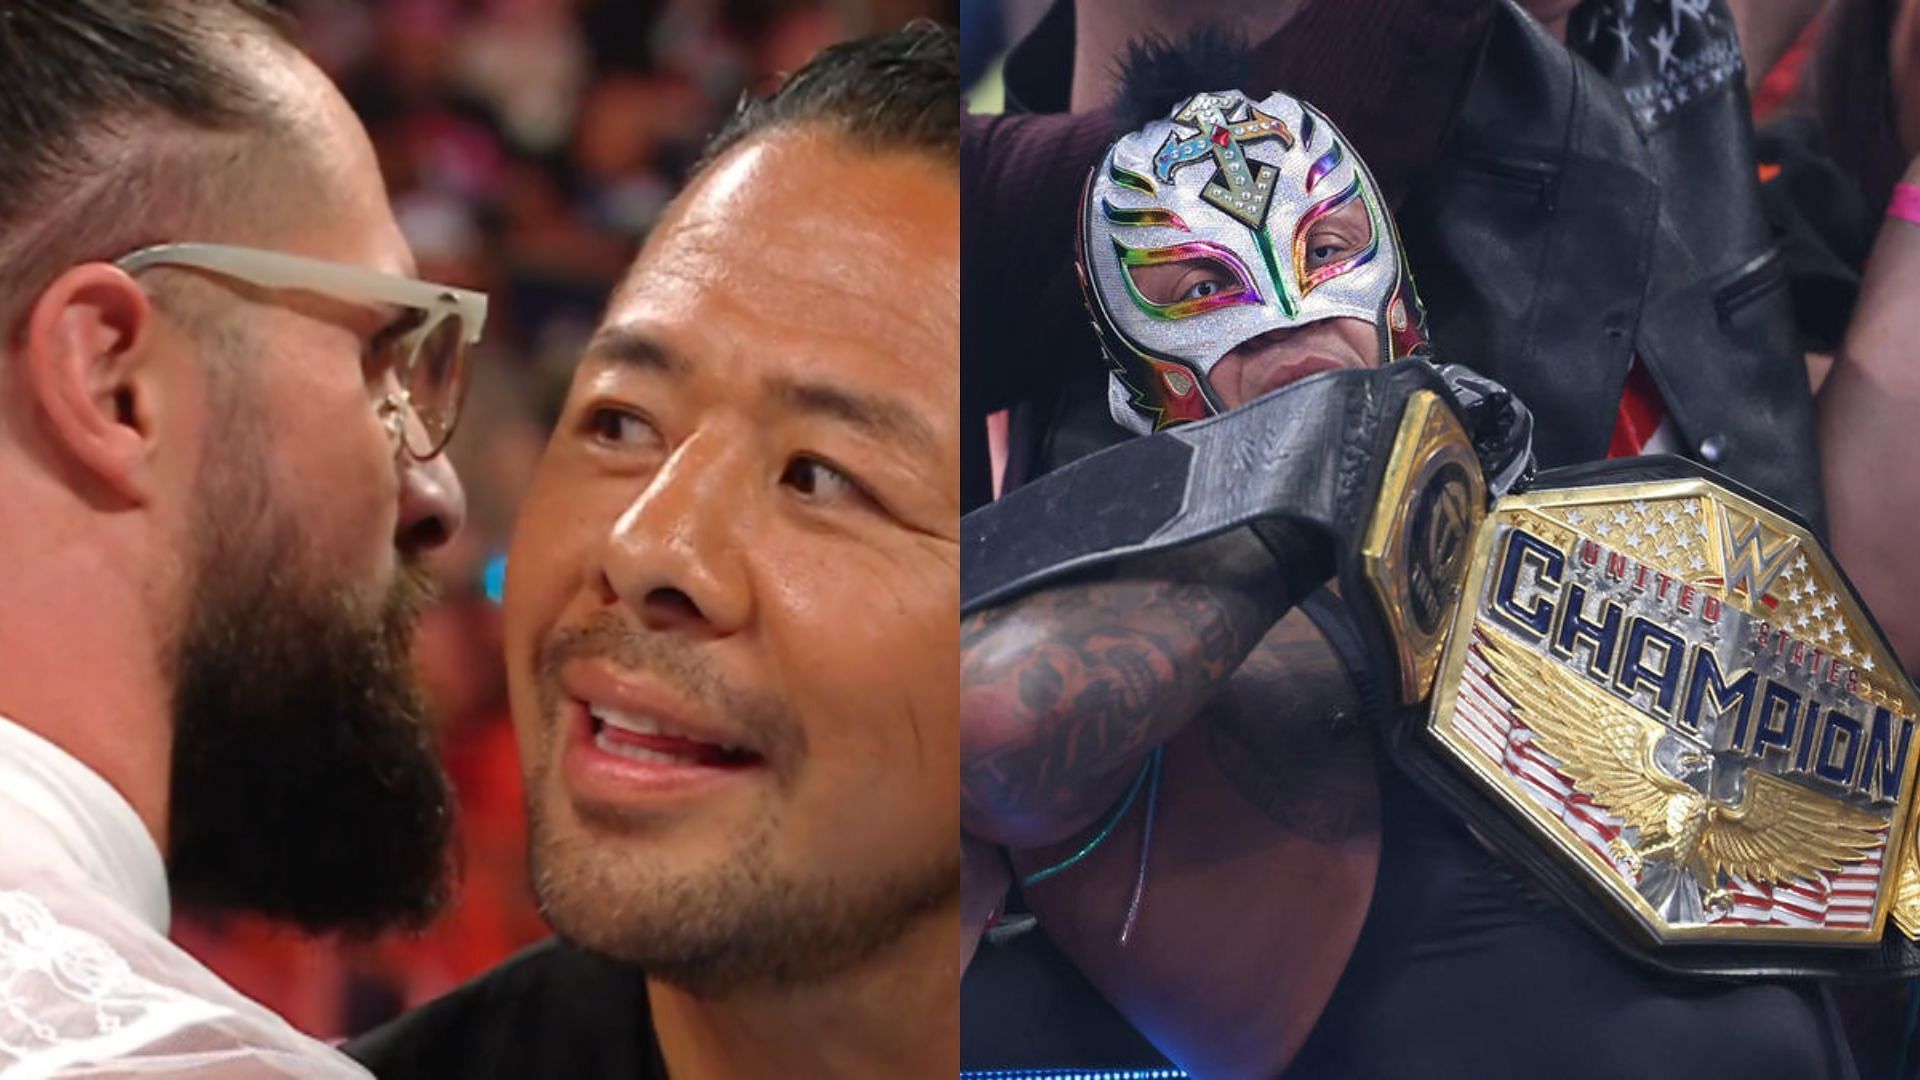 Shinsuke Nakamura and Seth Rollins are currently feuding with one another, Rey Mysterio is the current US Champion